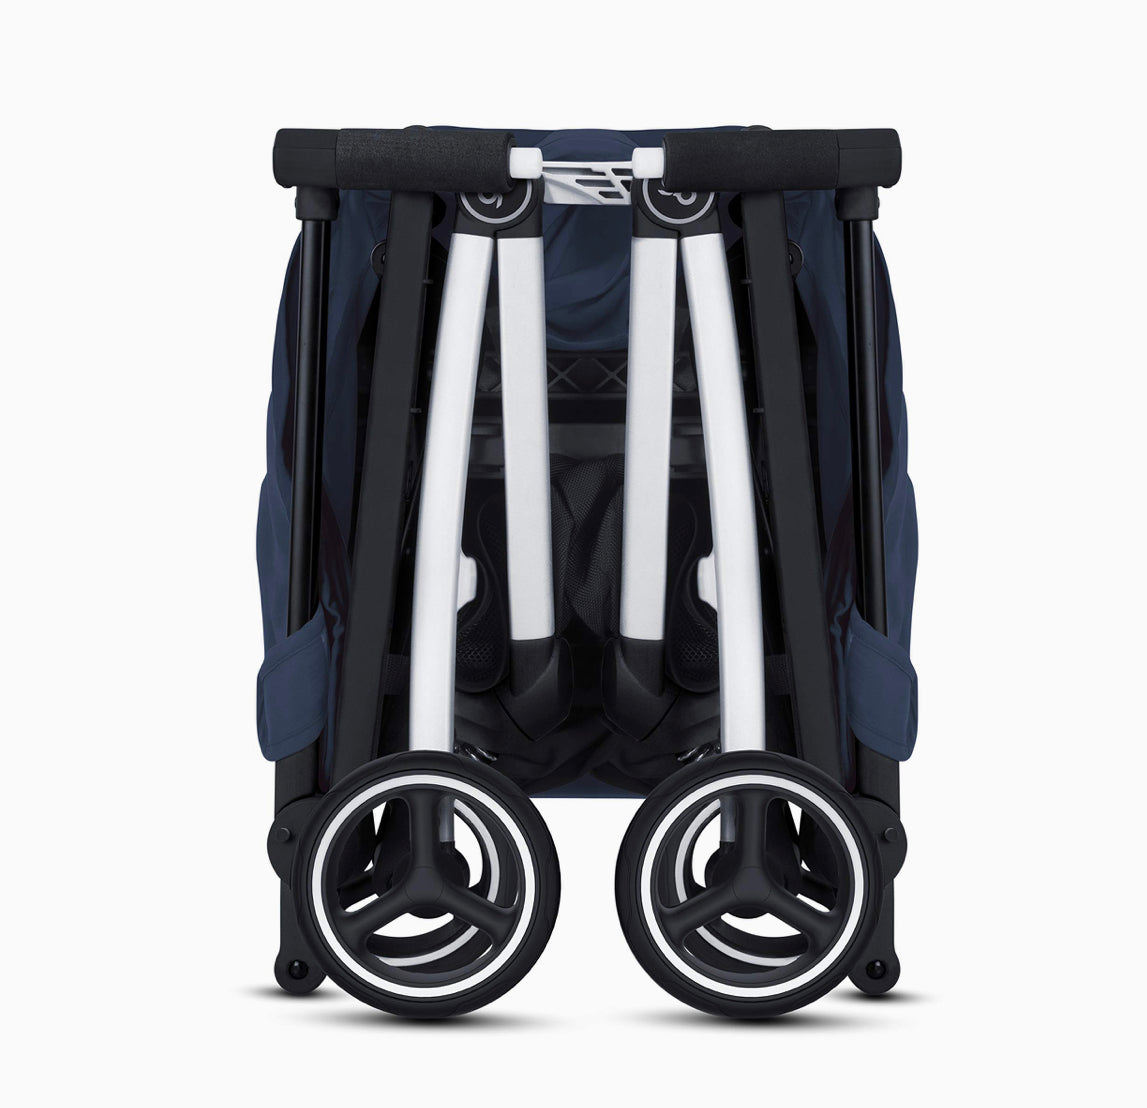 Pockit+ All City Stroller (same as Cybex Libelle, Latest 2020 version)